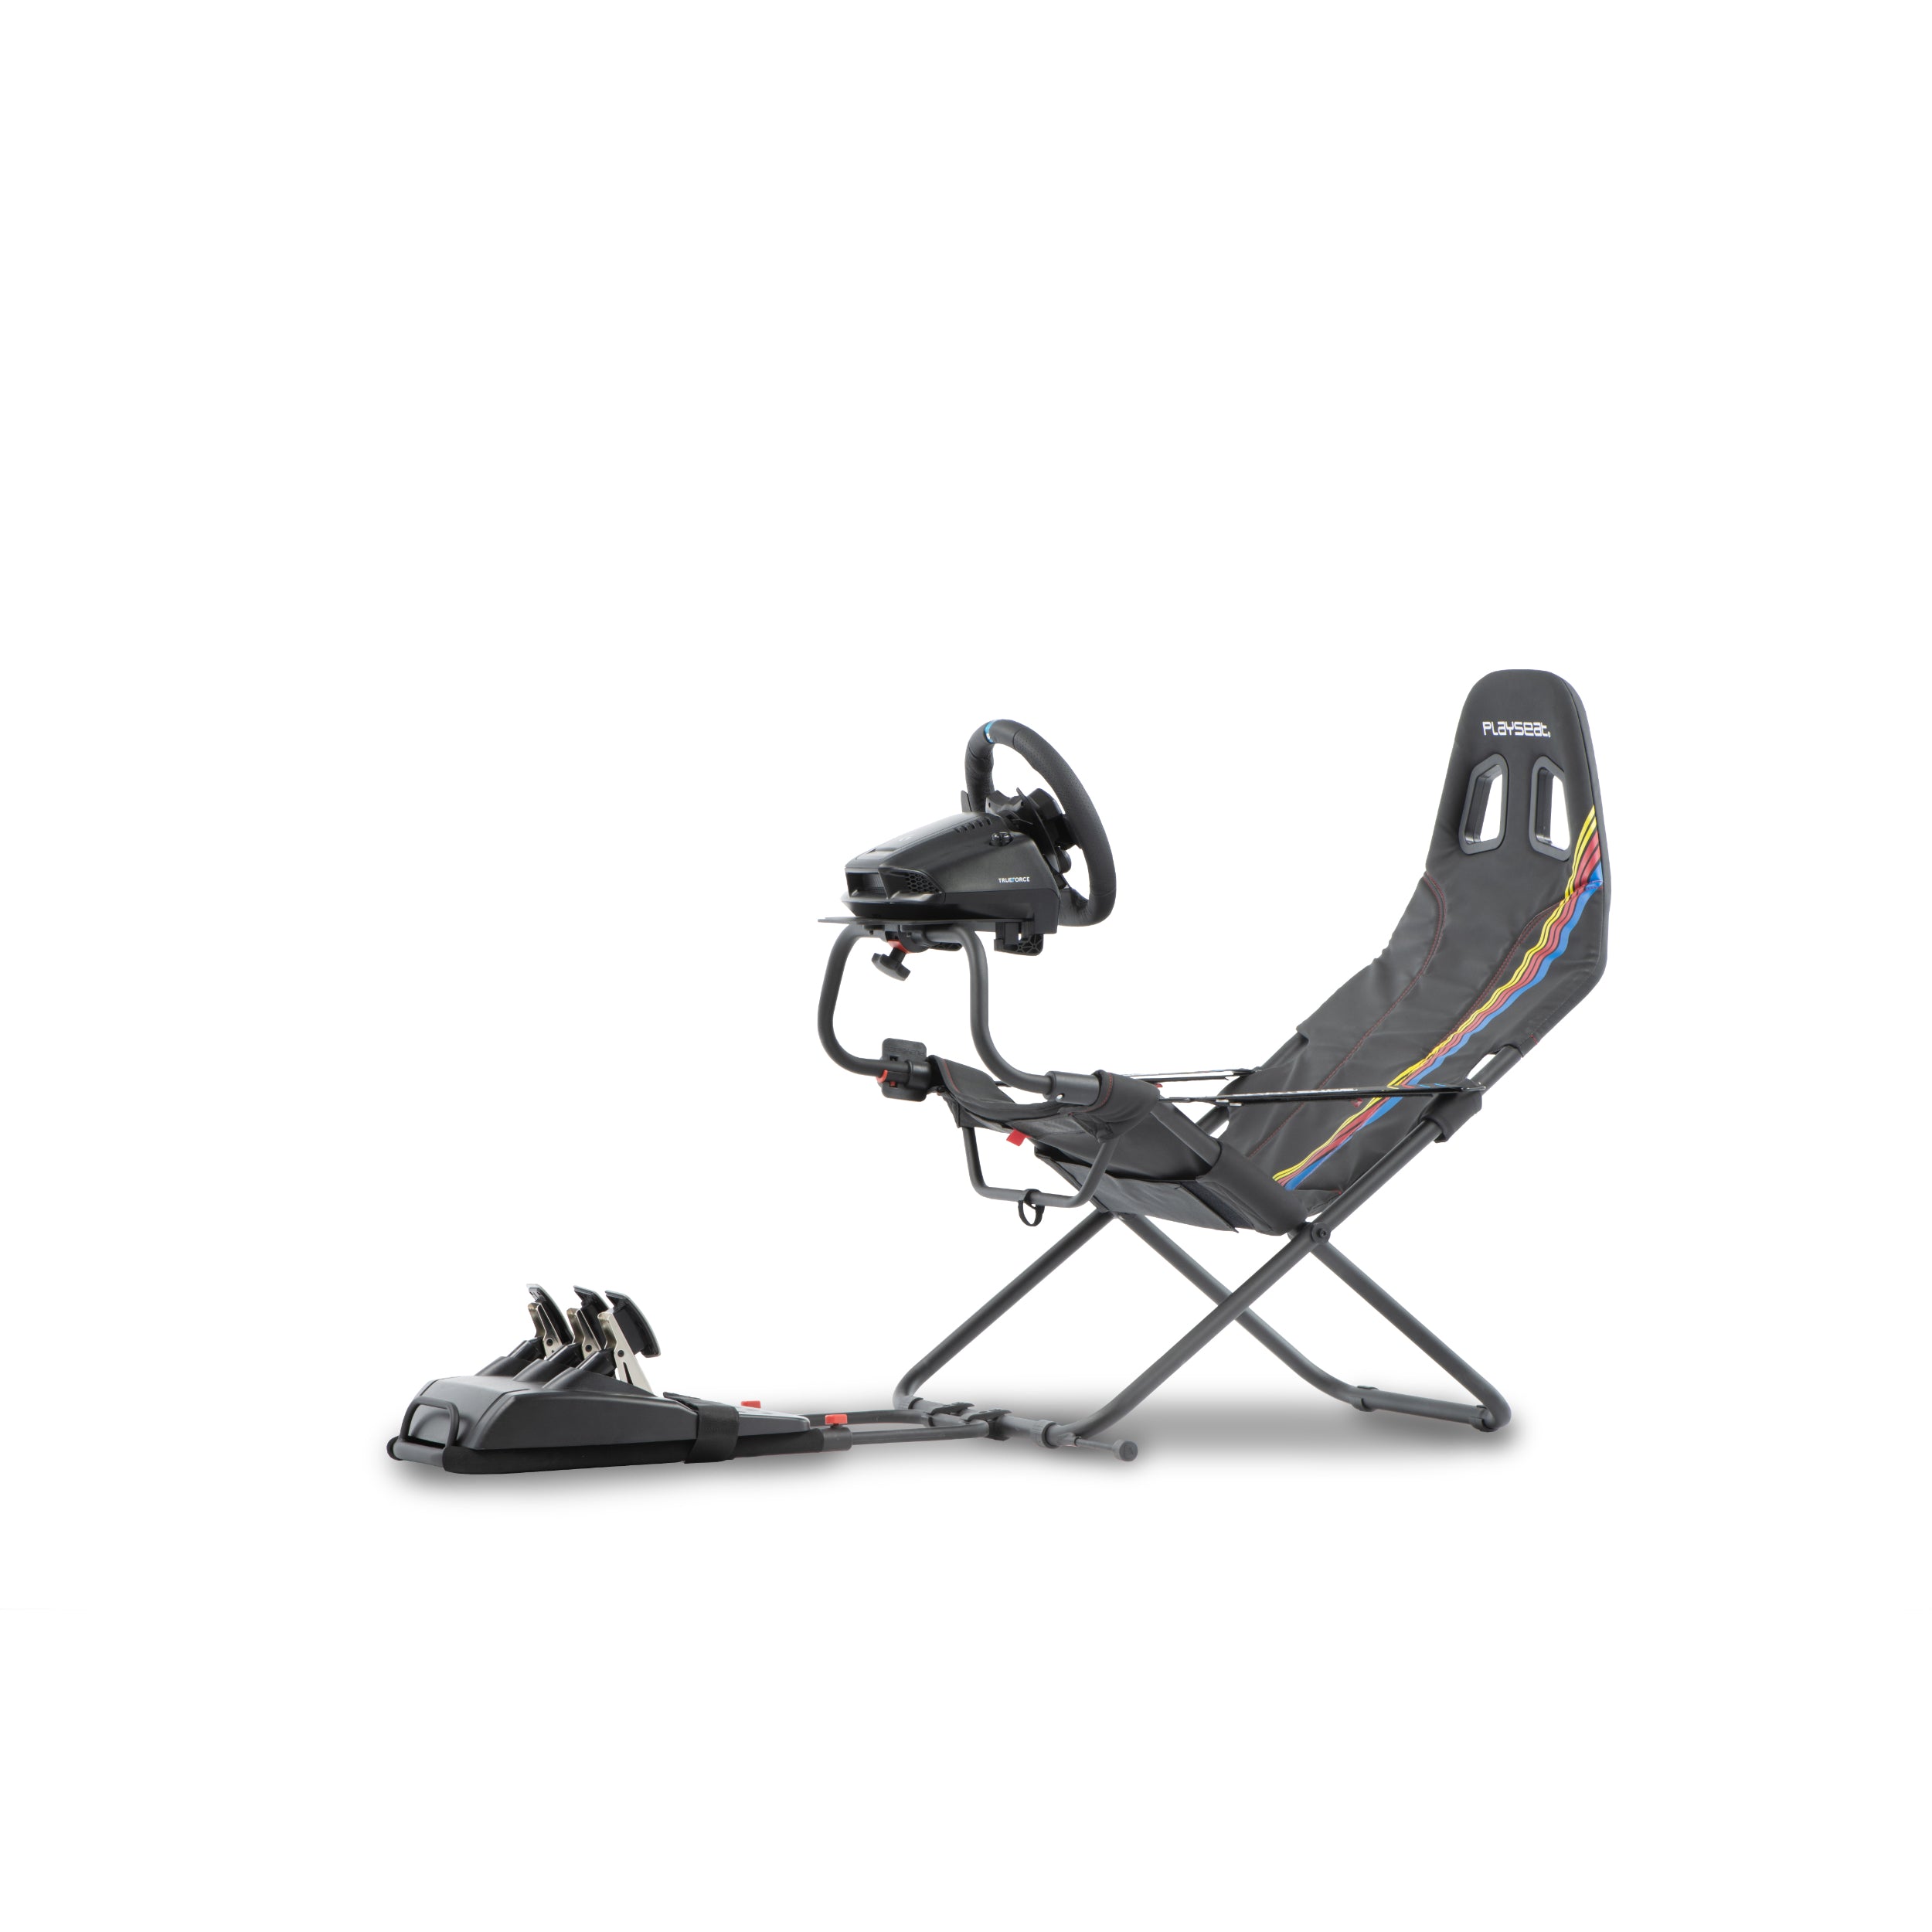 The cockpit for race sims is a high hurdle We recommend Playseat  Challenge! - Saiga NAK